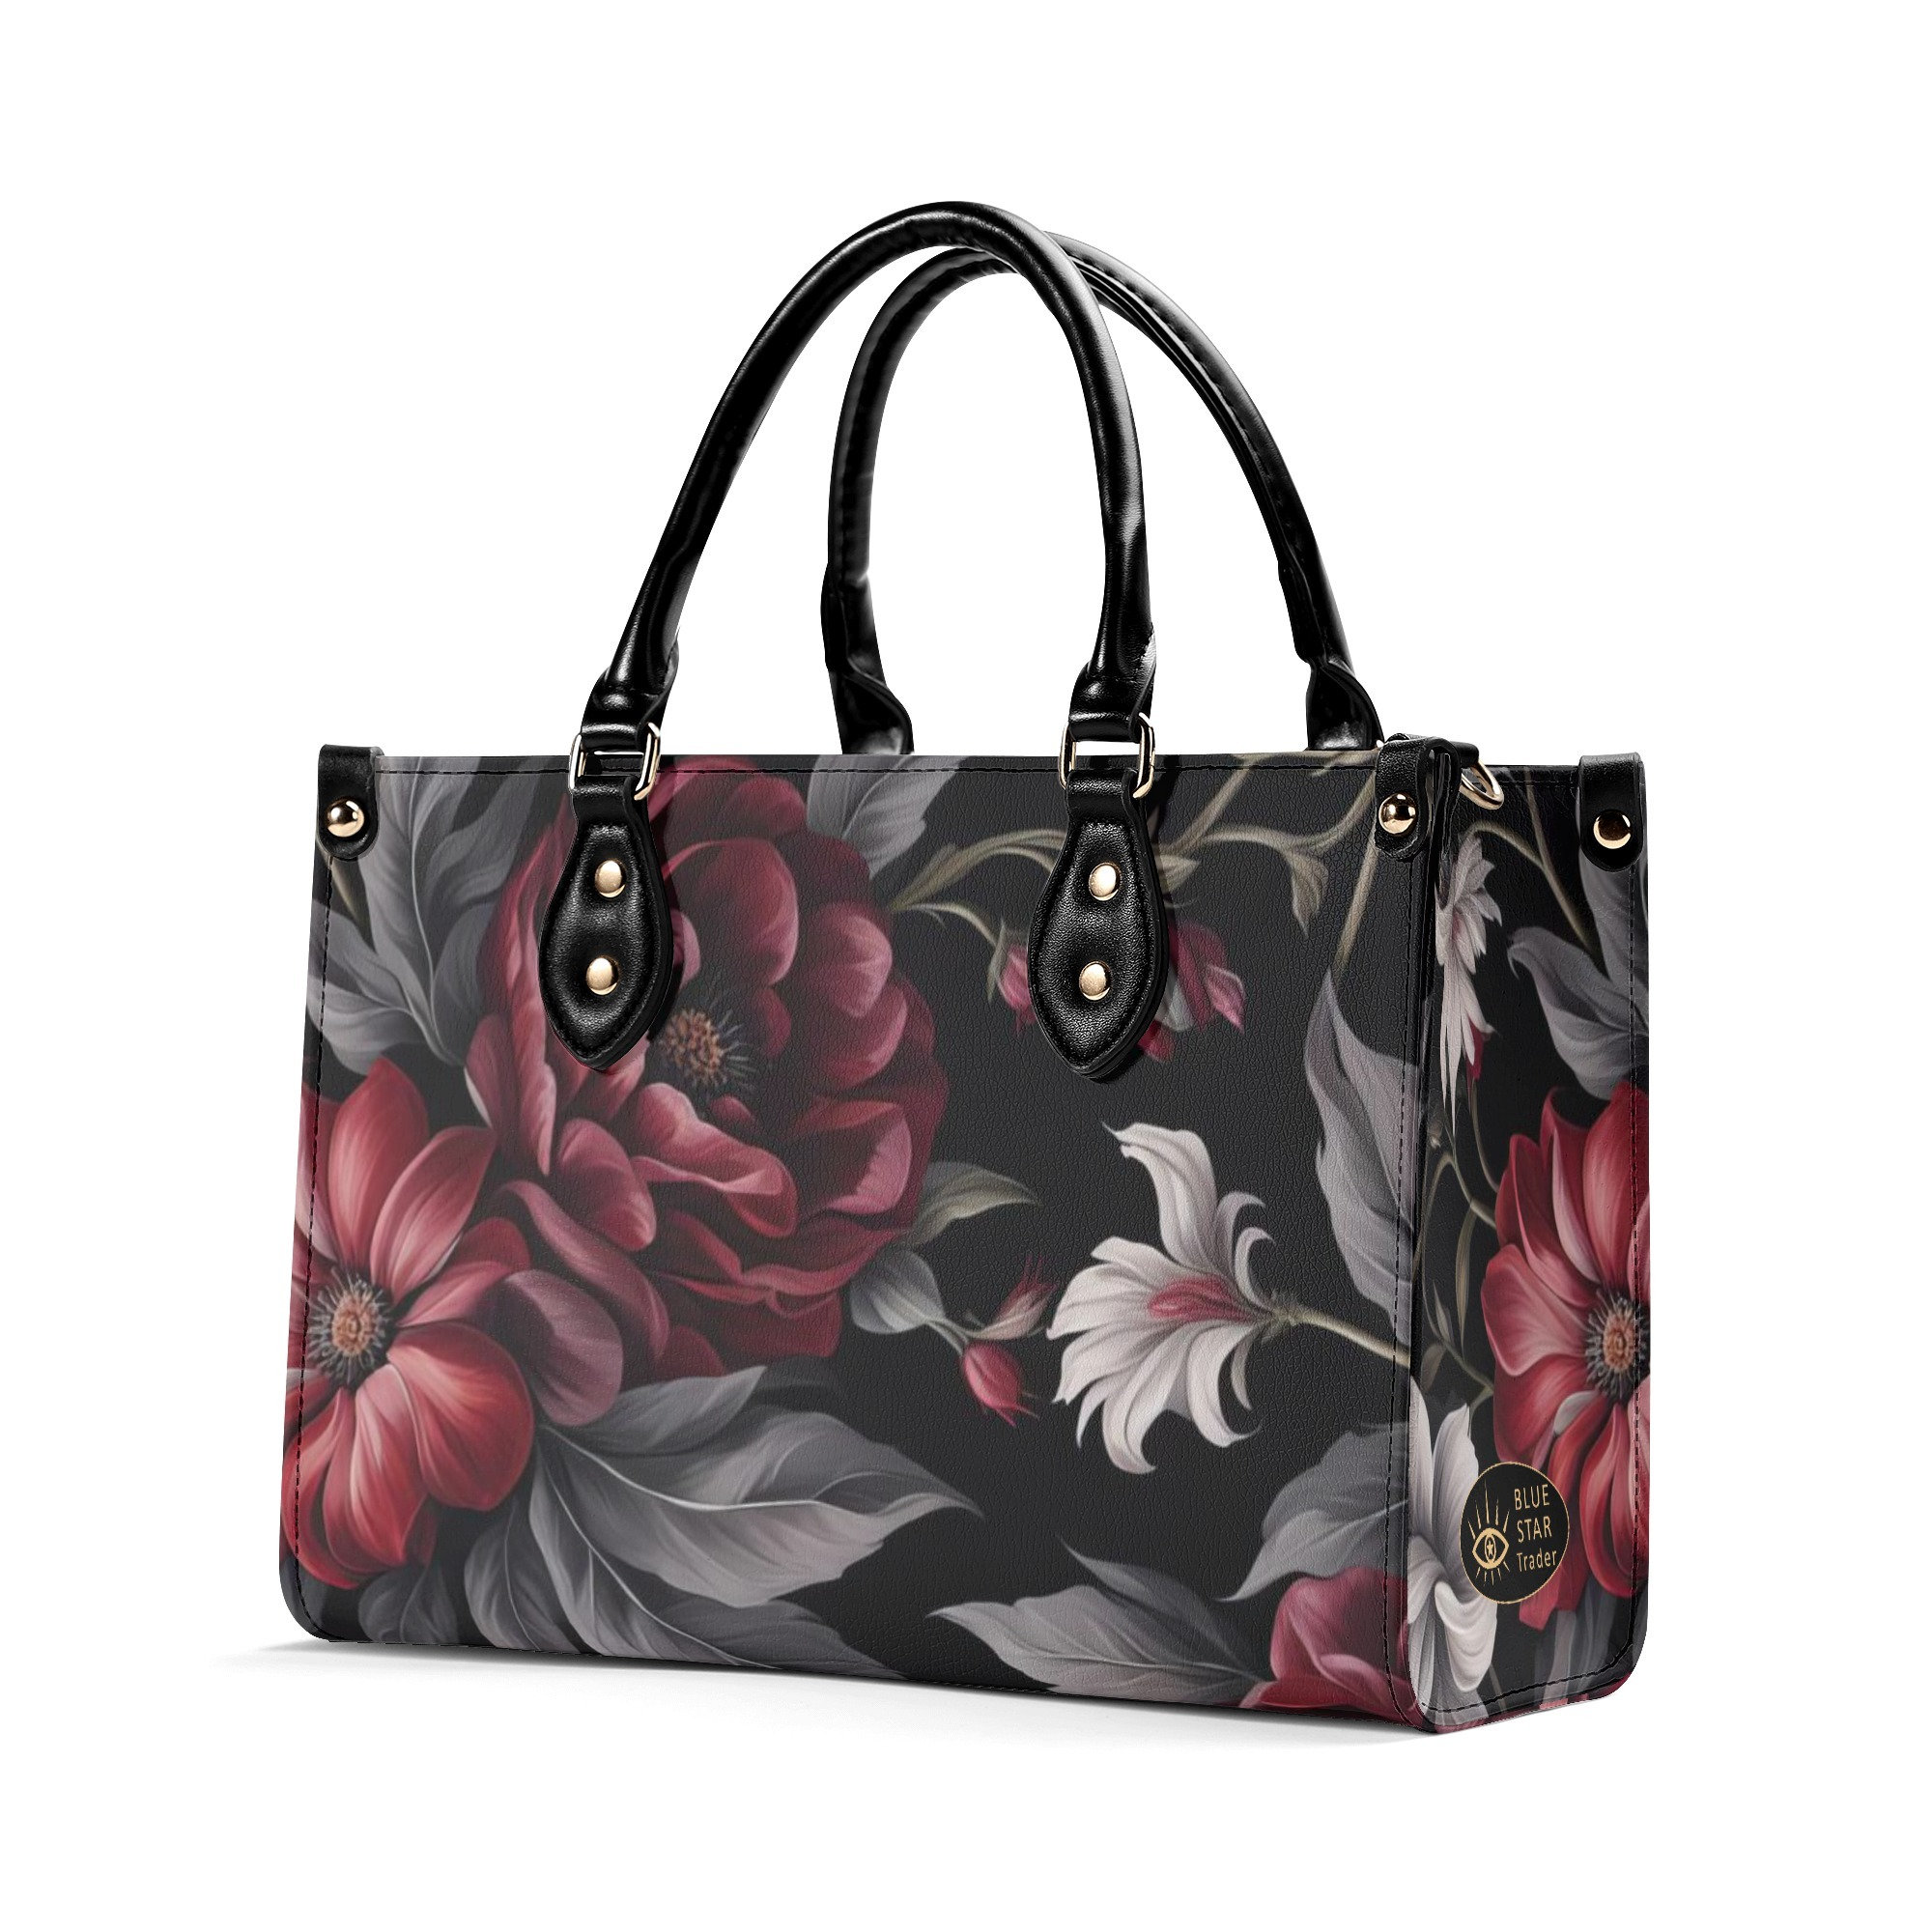 Crimson Rose - Goth Red Flowers Purse, Floral Faux Leather Hand Bag